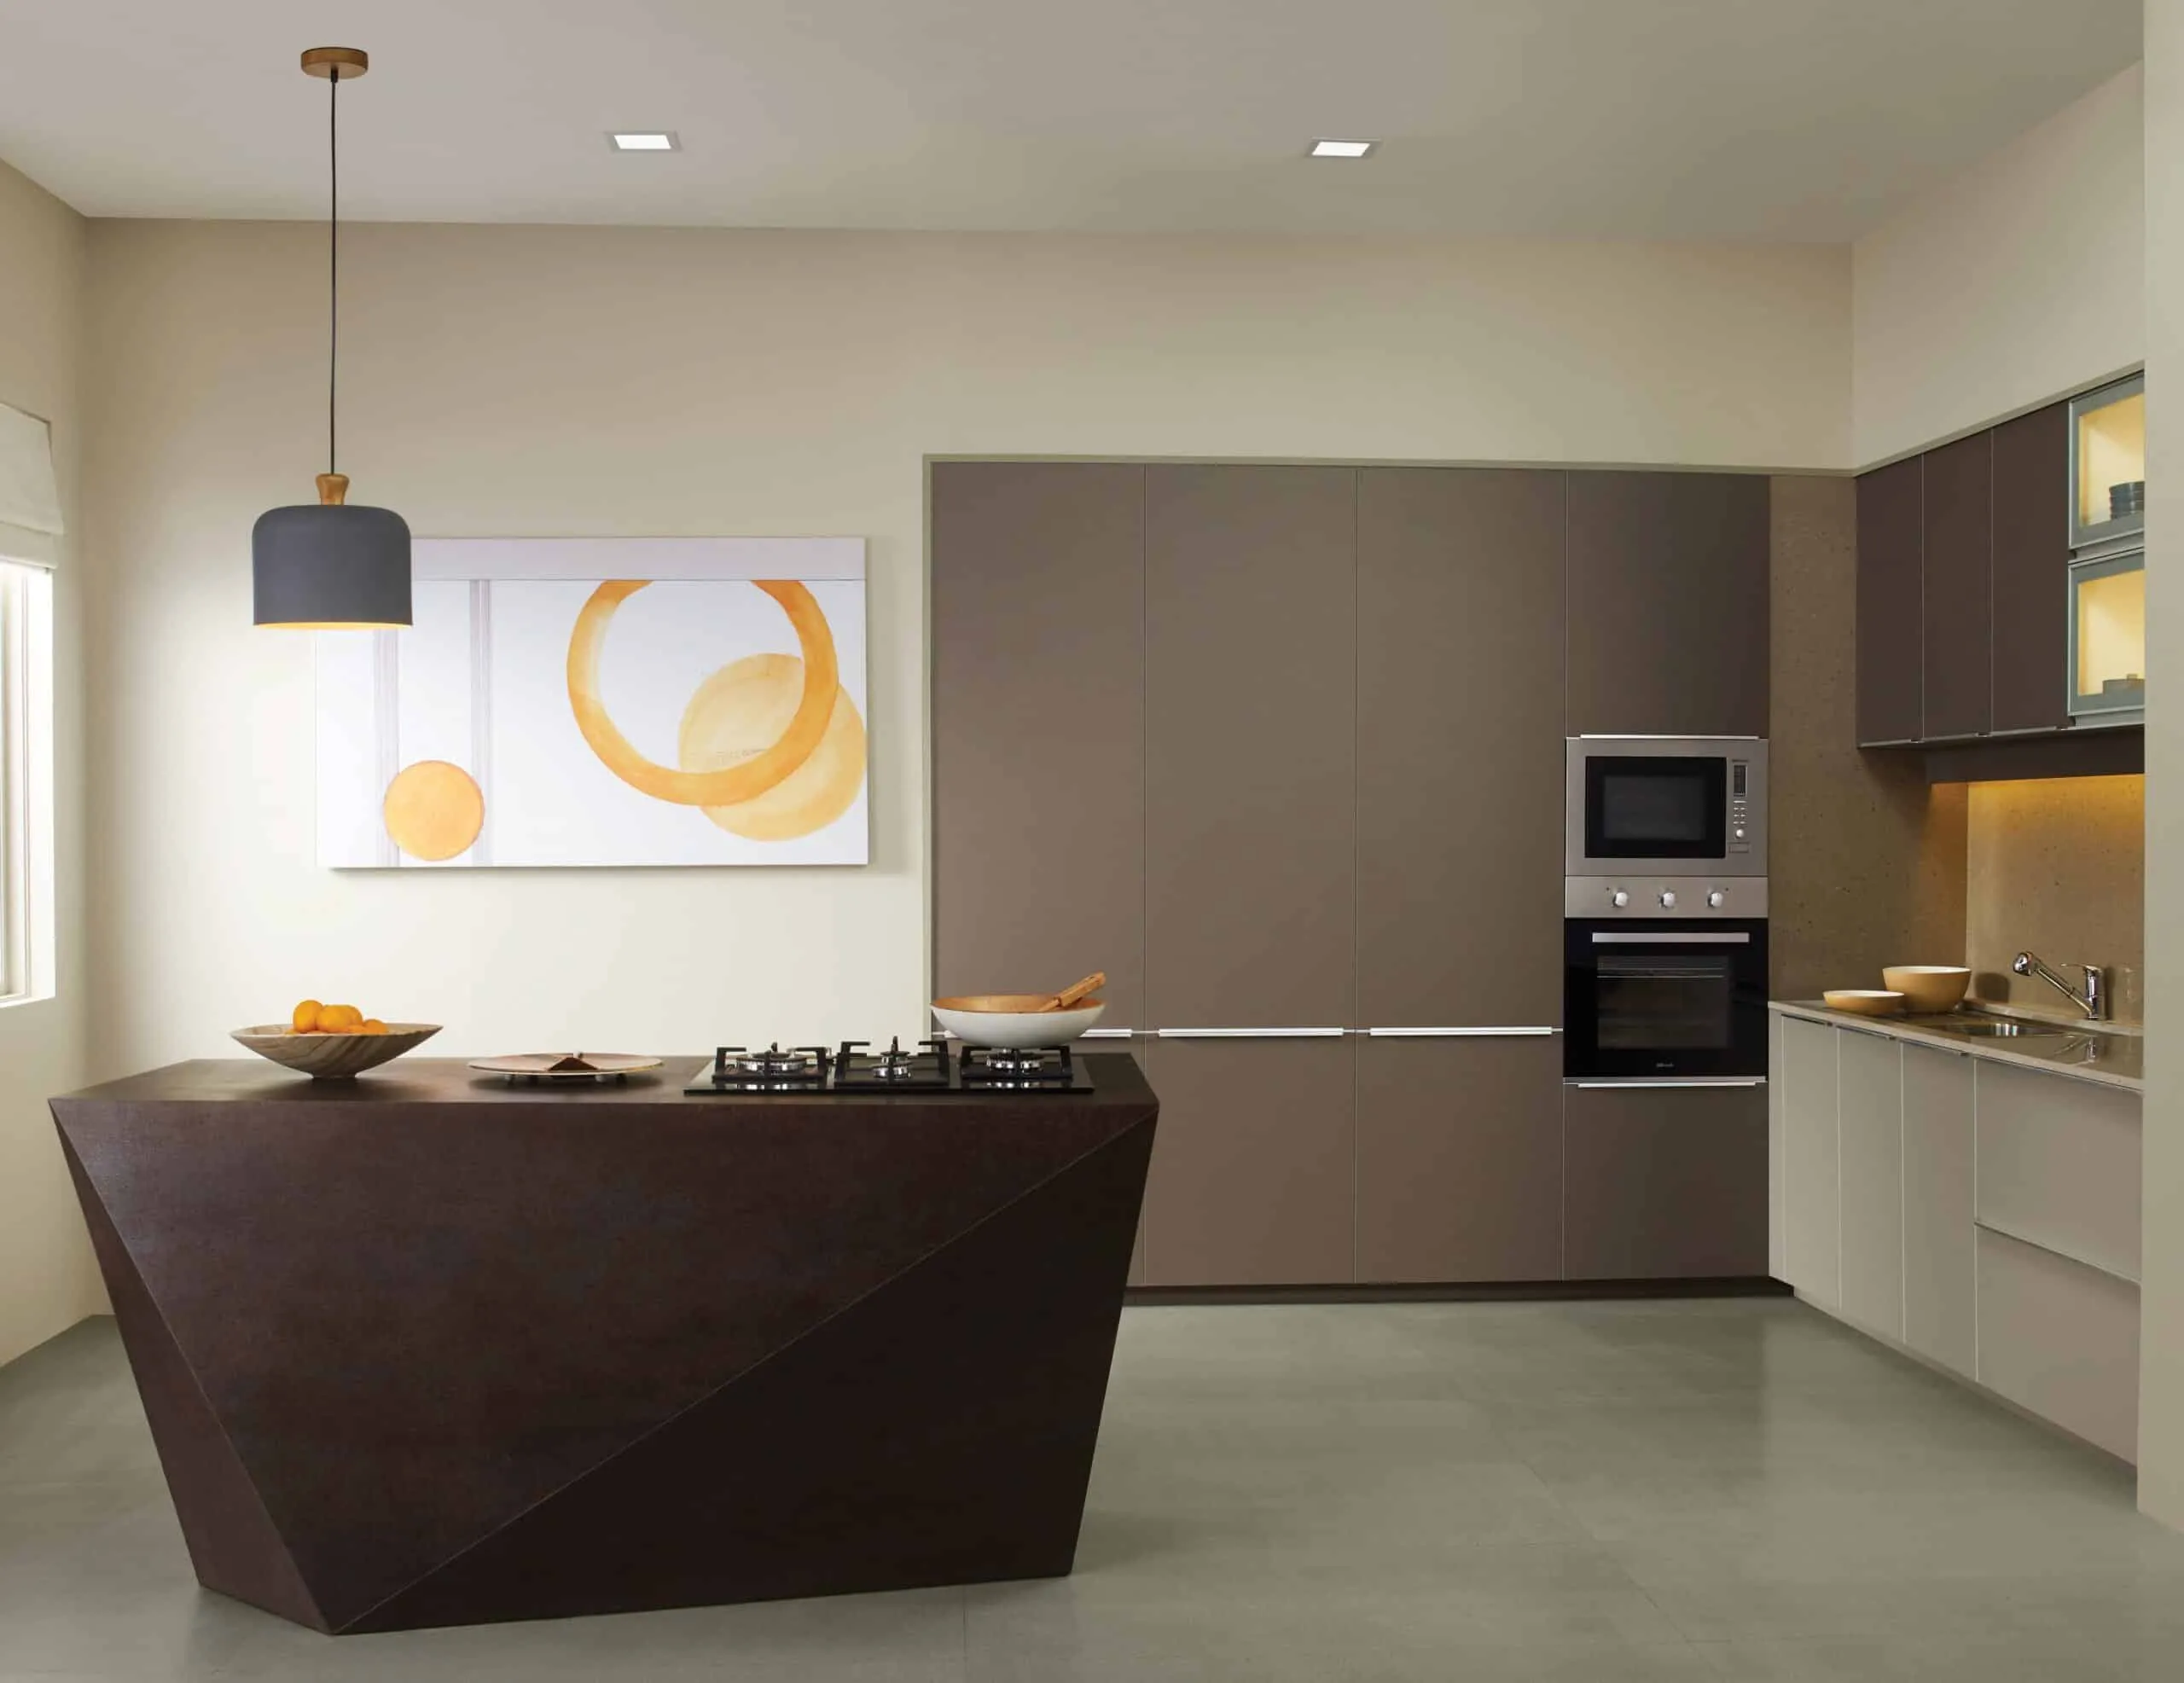 Sleek kitchen, all designs & types - L,U or C modular kitchens & accessories from sleek at lowest cost.